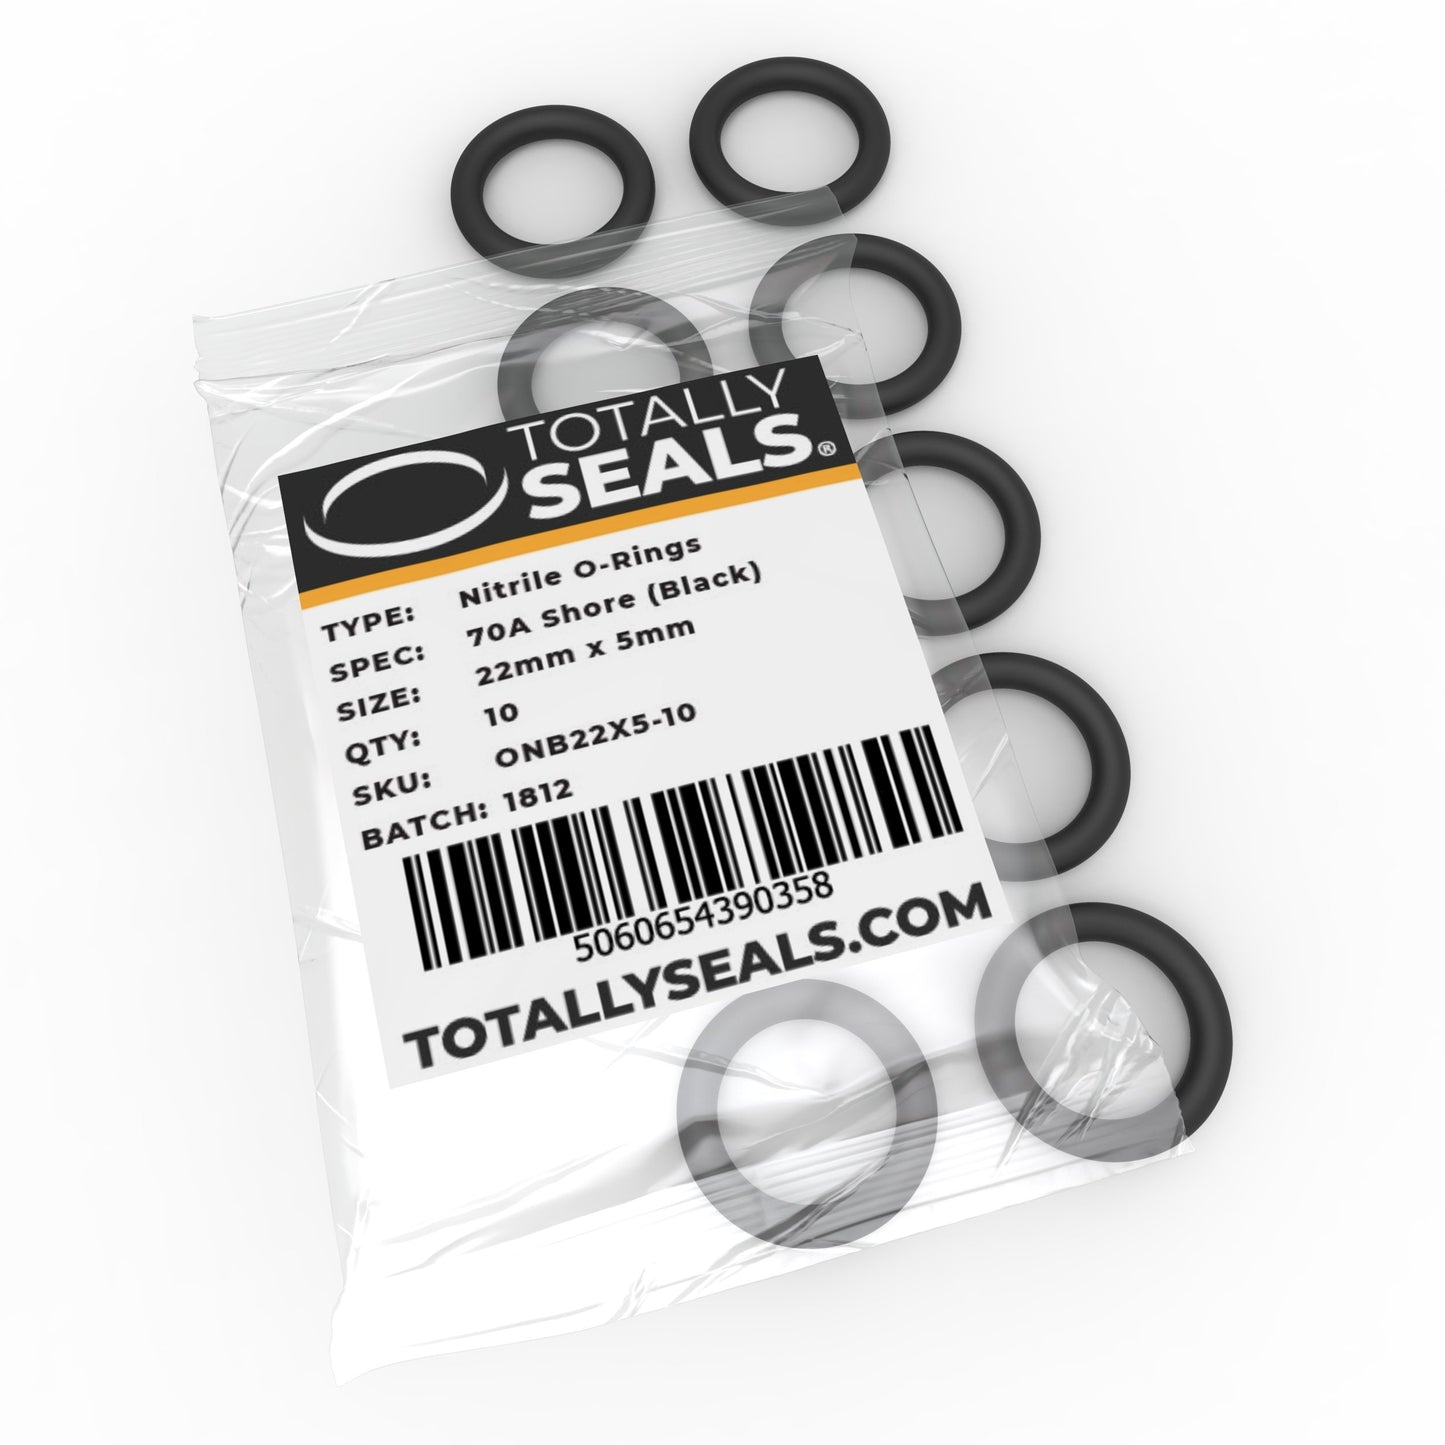 22mm x 5mm (32mm OD) Nitrile O-Rings - Totally Seals®